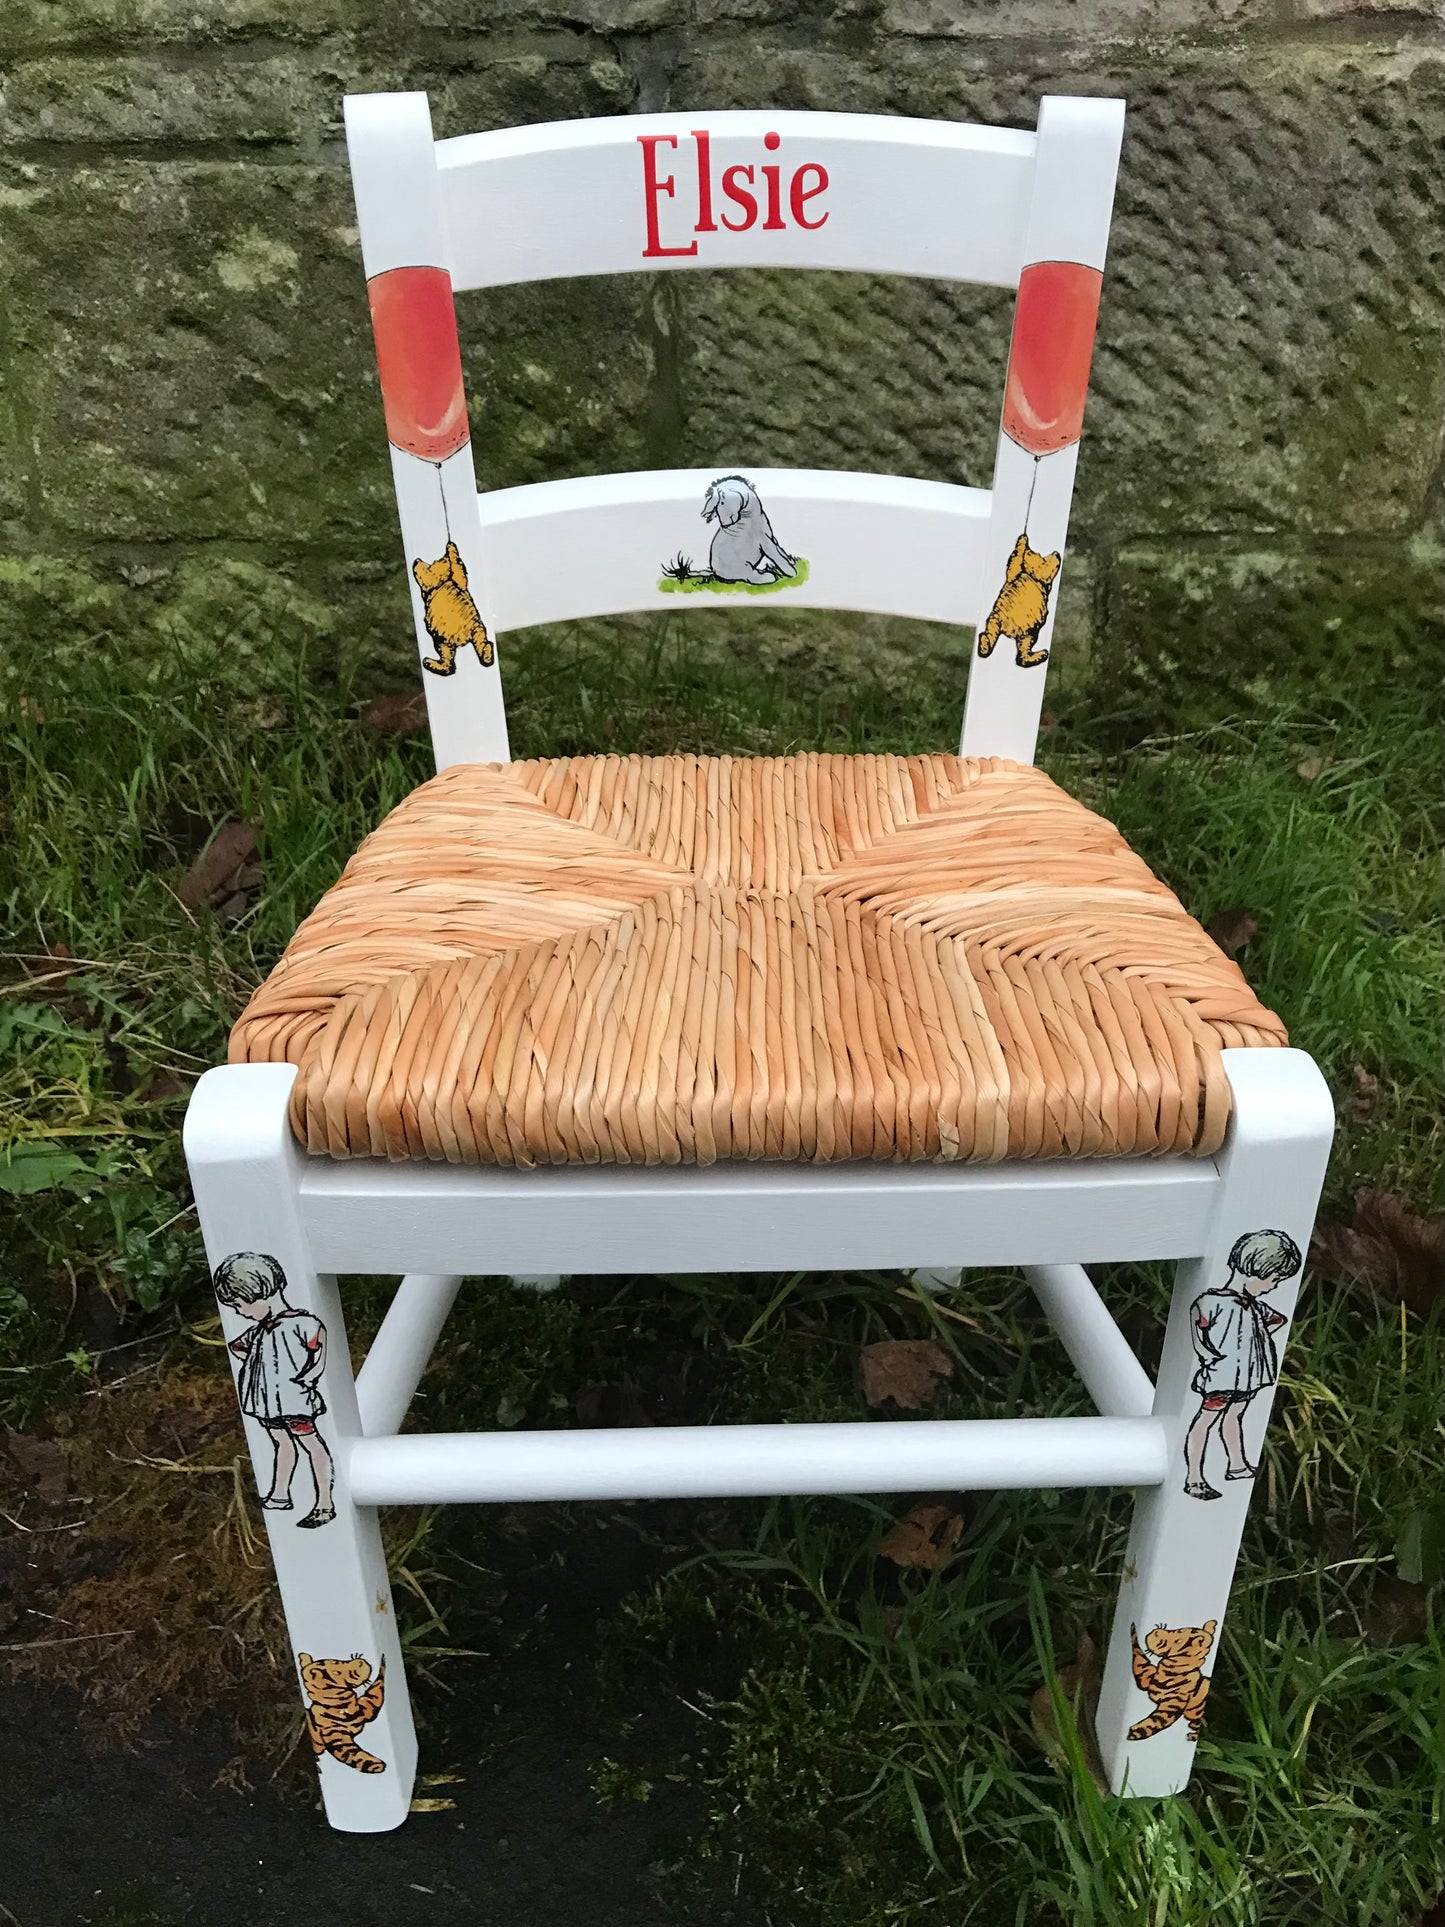 Commission for Sarah 2 children's personalised chairs